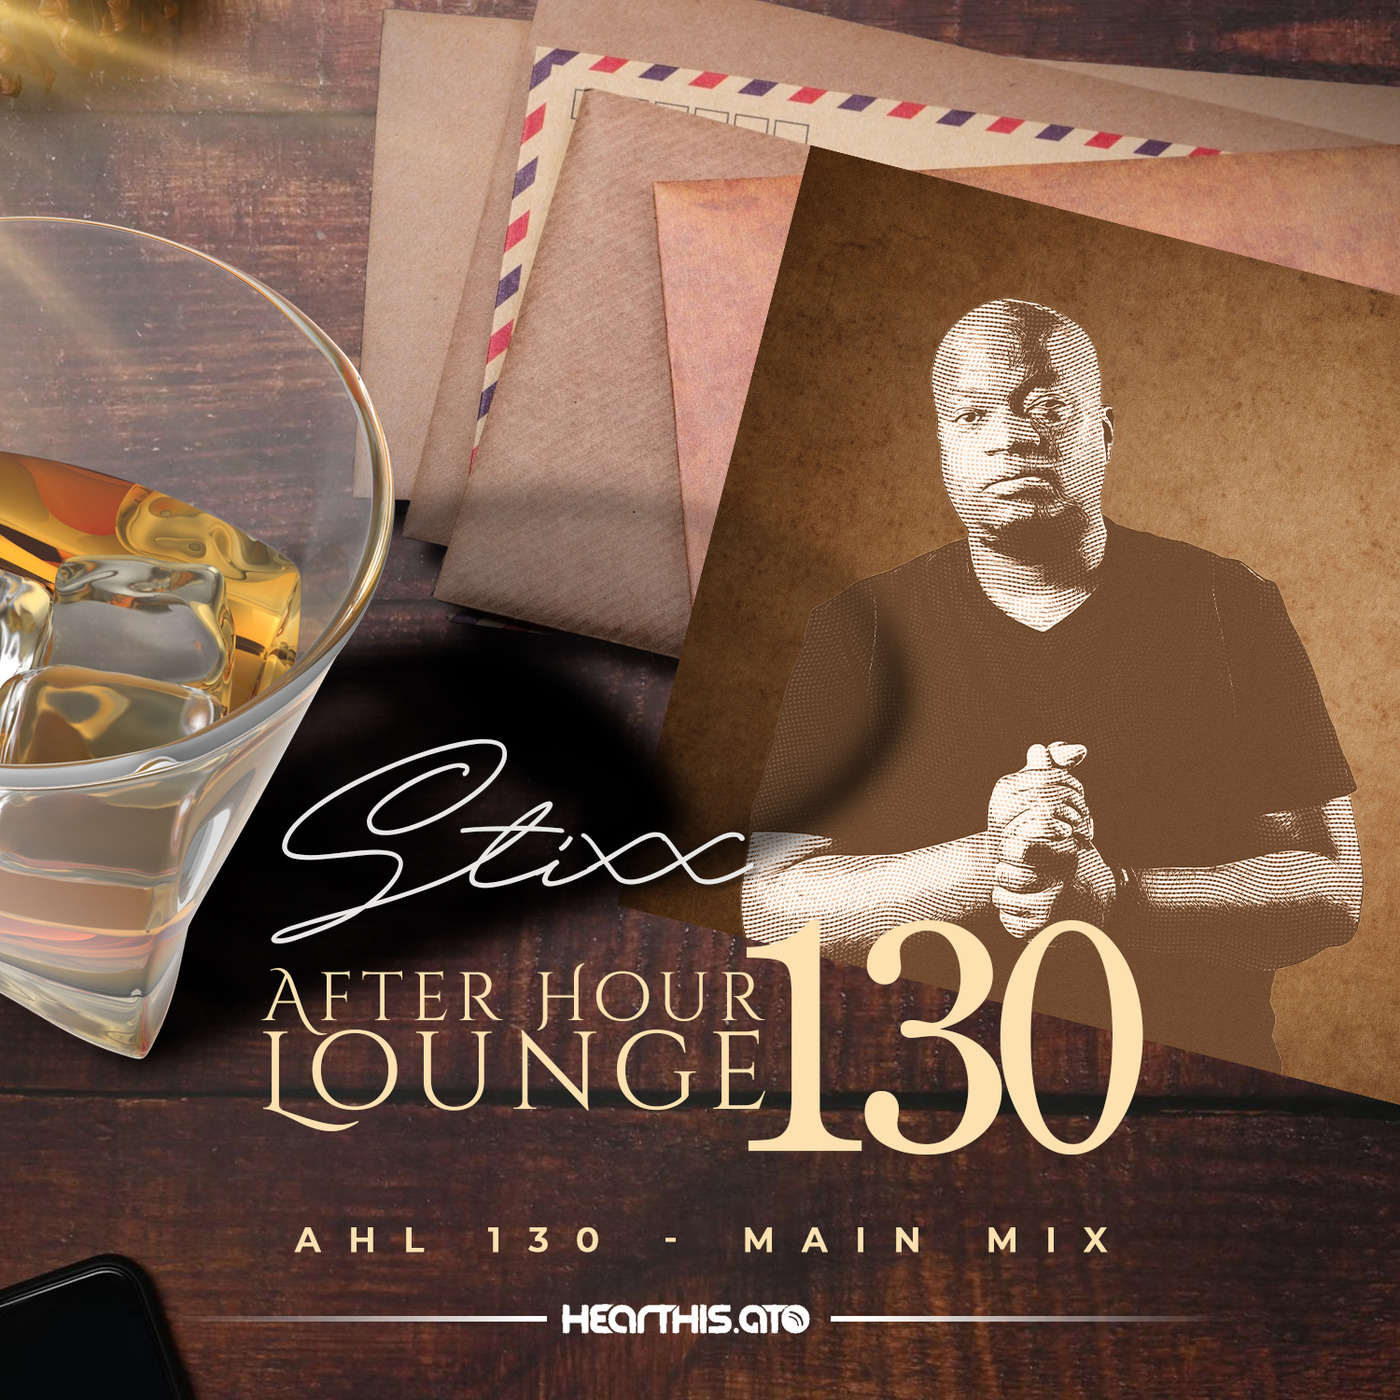 After Hour Lounge 130 (Main Mix) mixed by Stixx